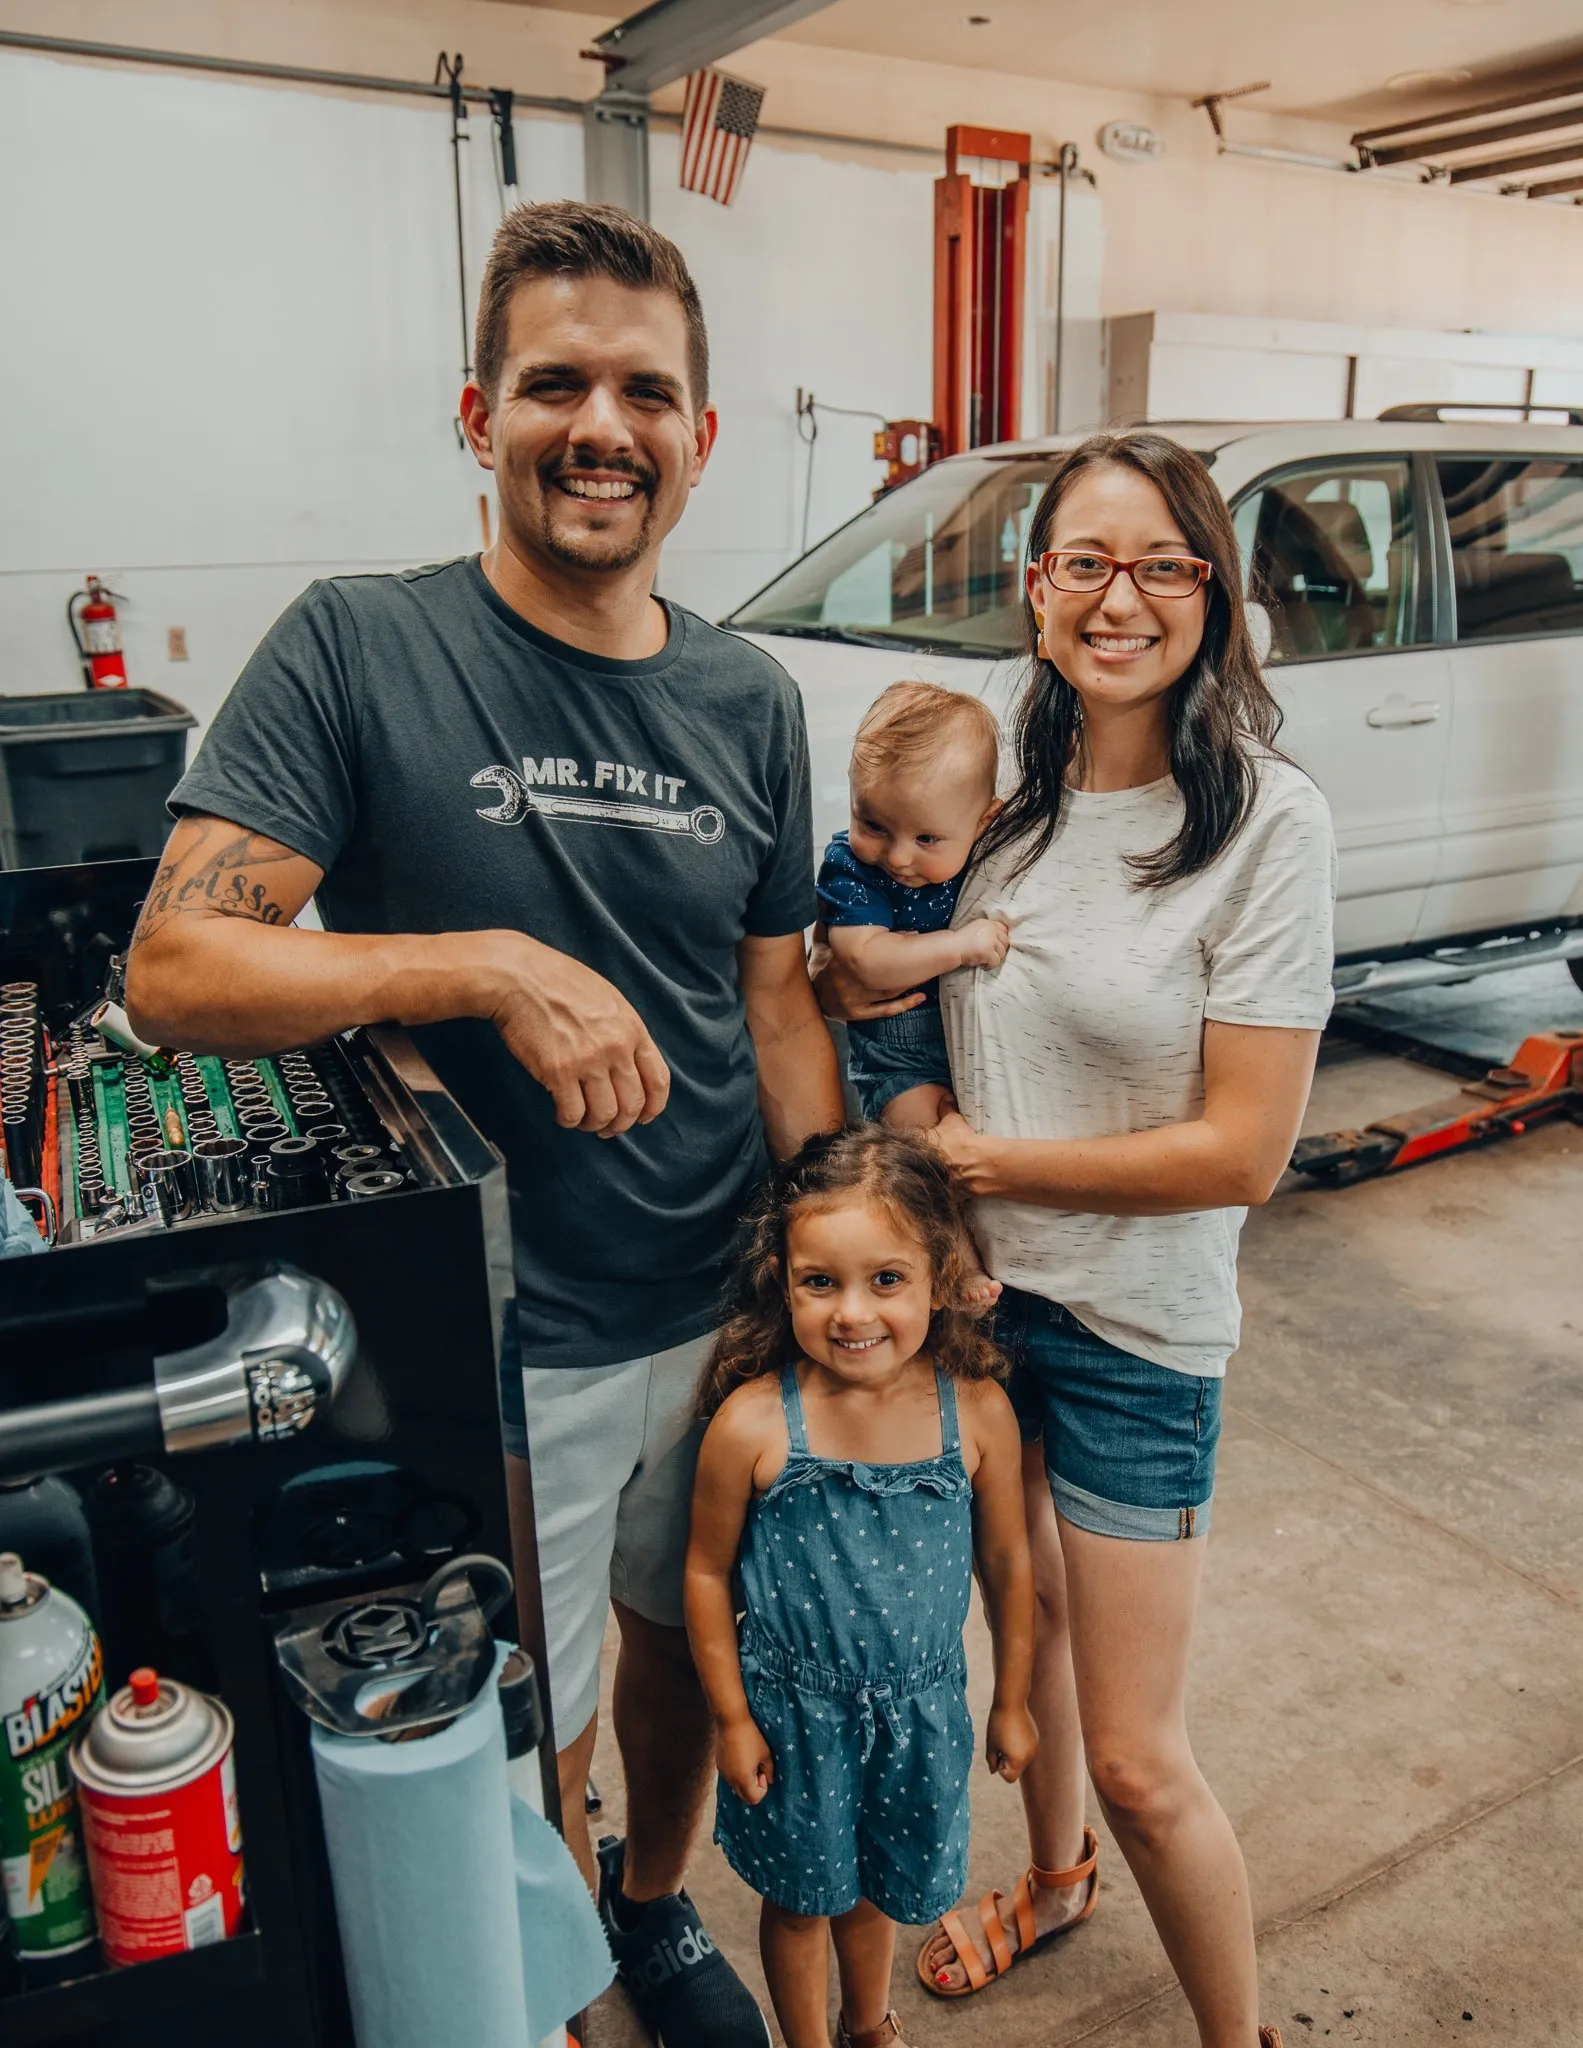 Enright Automotive shop owner Chris Enright with wife and kids. Also in the image are shop tools and a white car in the background.